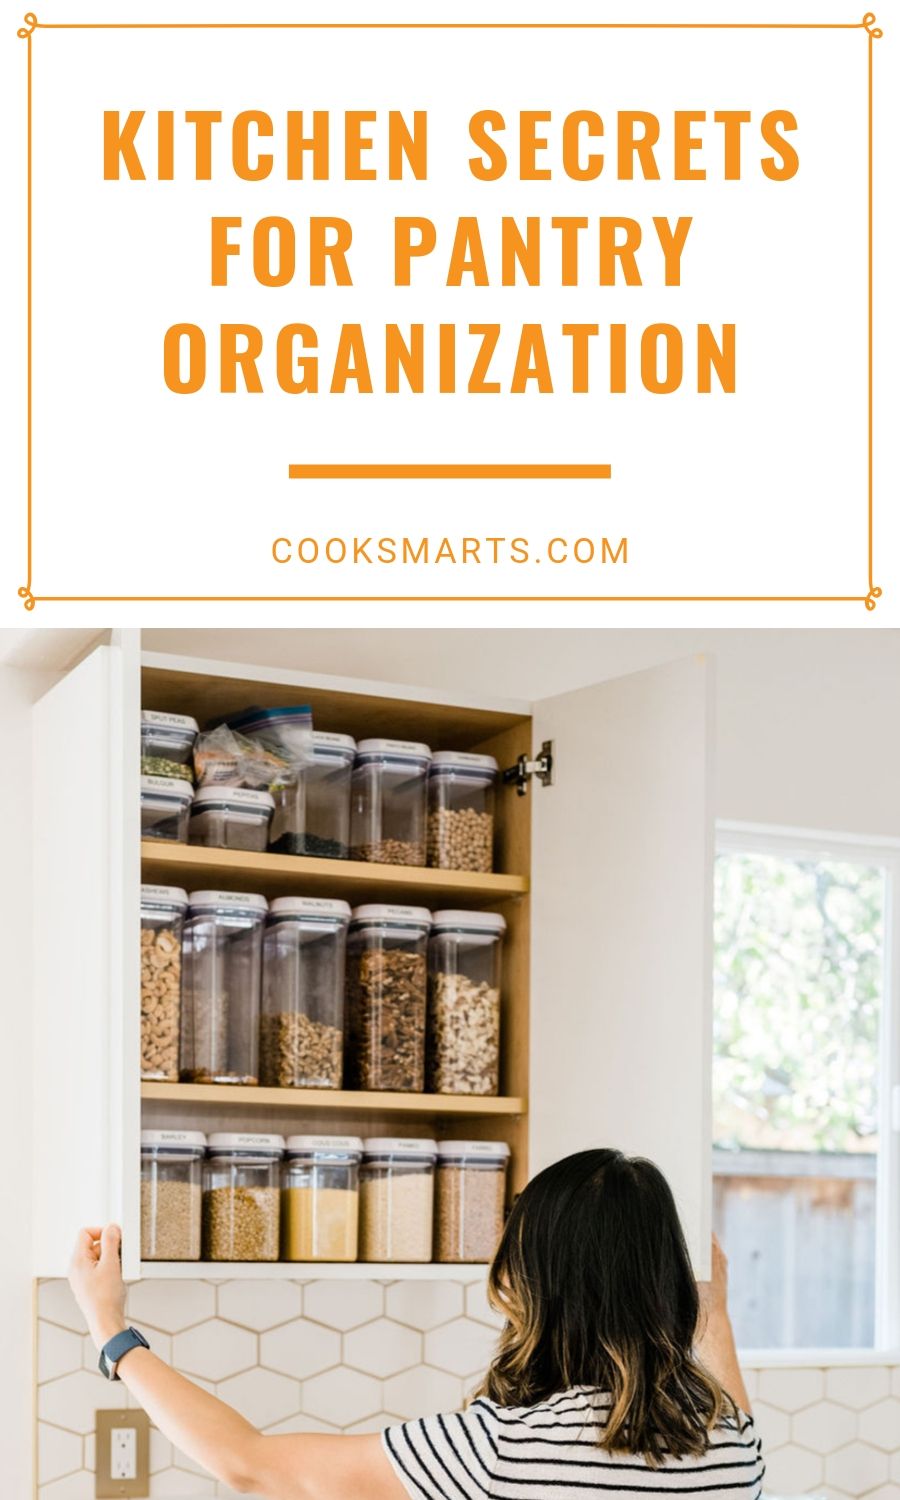 Kitchen Secrets for Pantry Organization | In the Kitchen with Cook Smarts Podcast